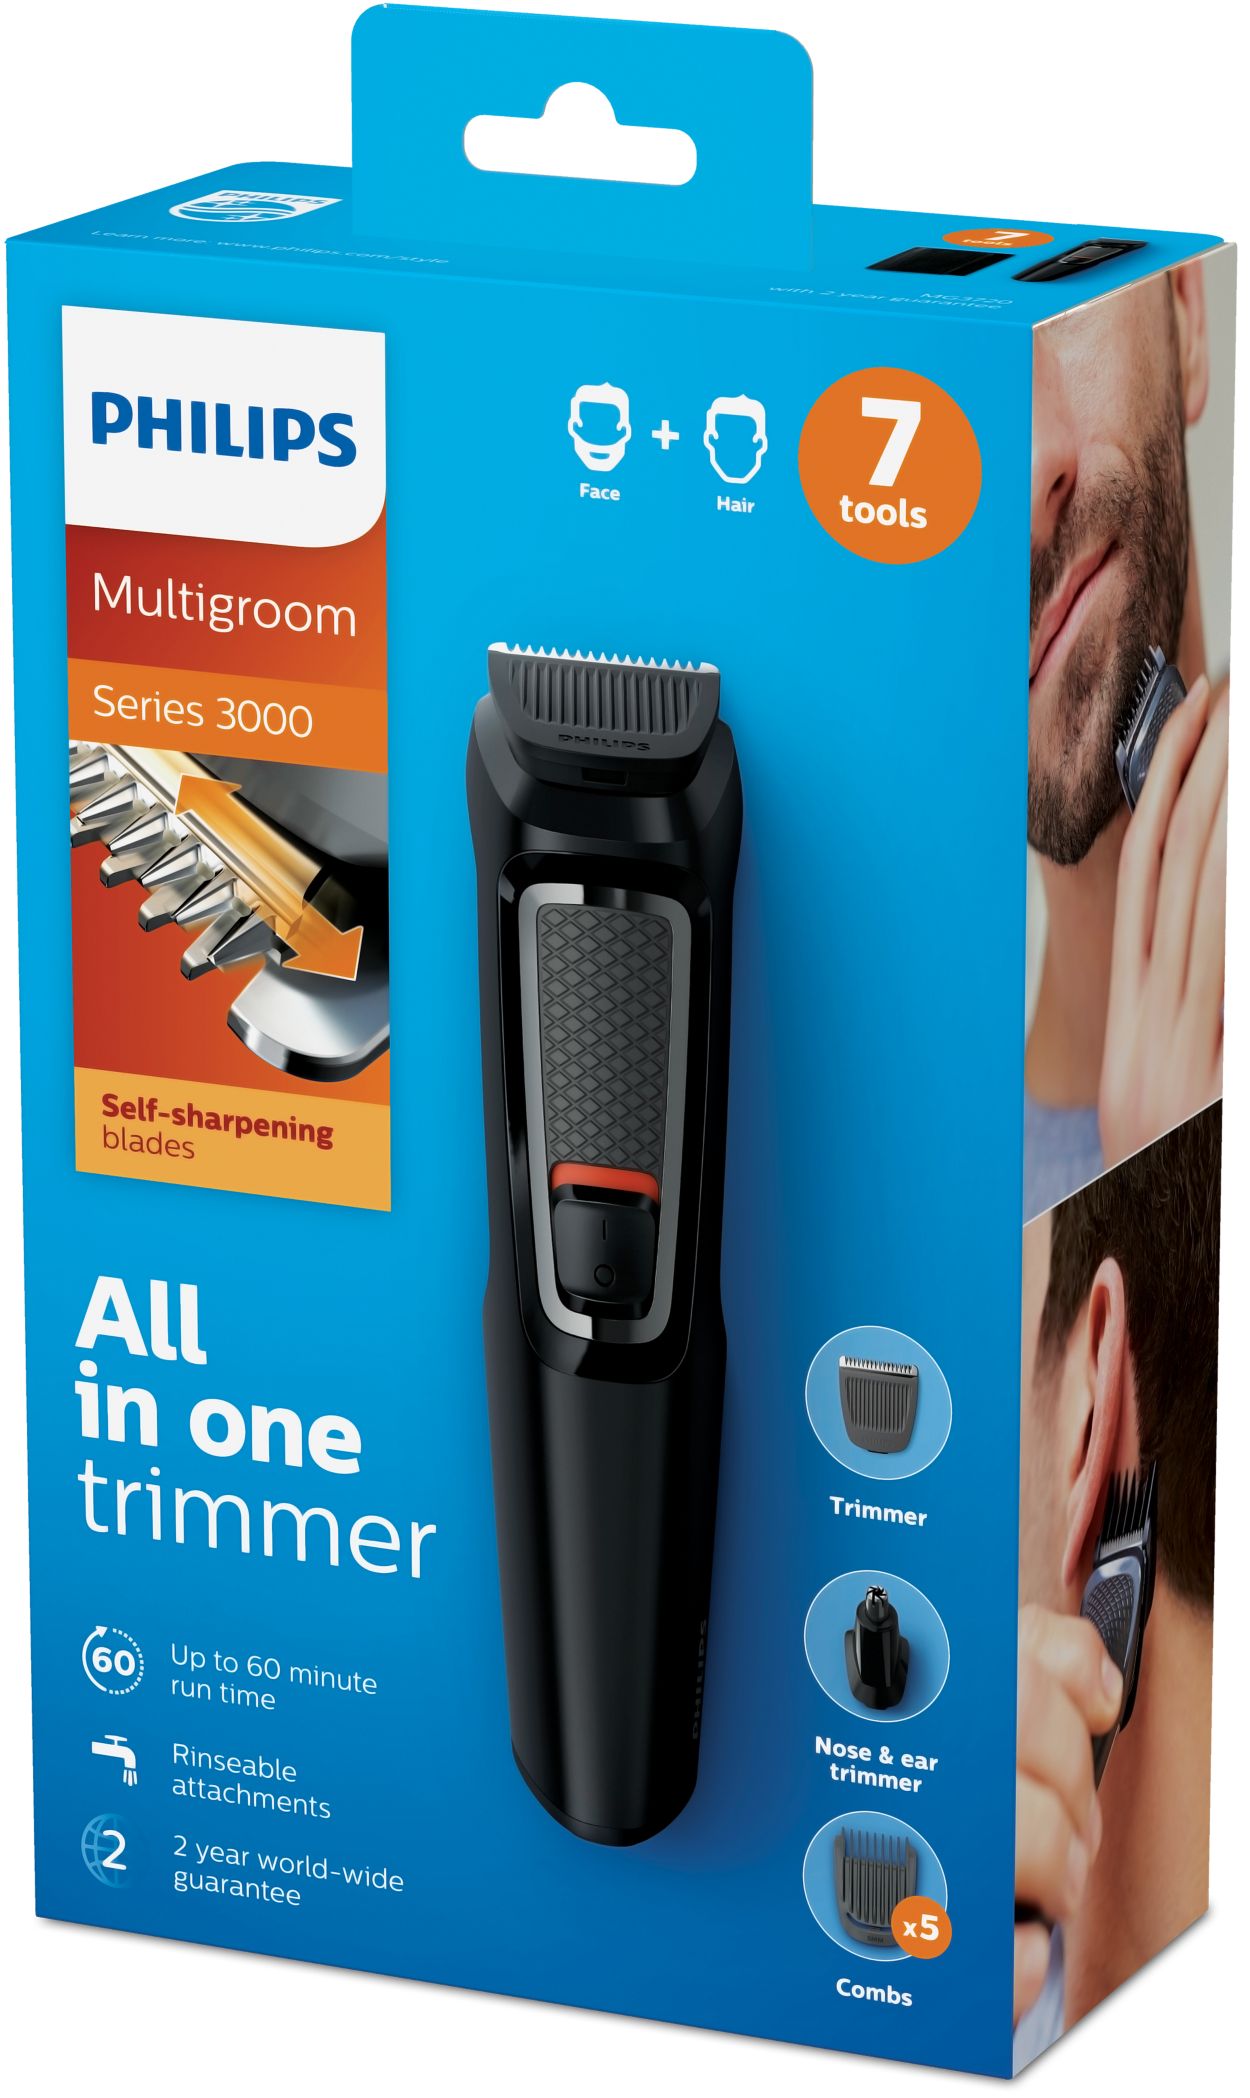 Multigroom series 3000 7-in-1, Face and Hair MG3720/13 | Philips